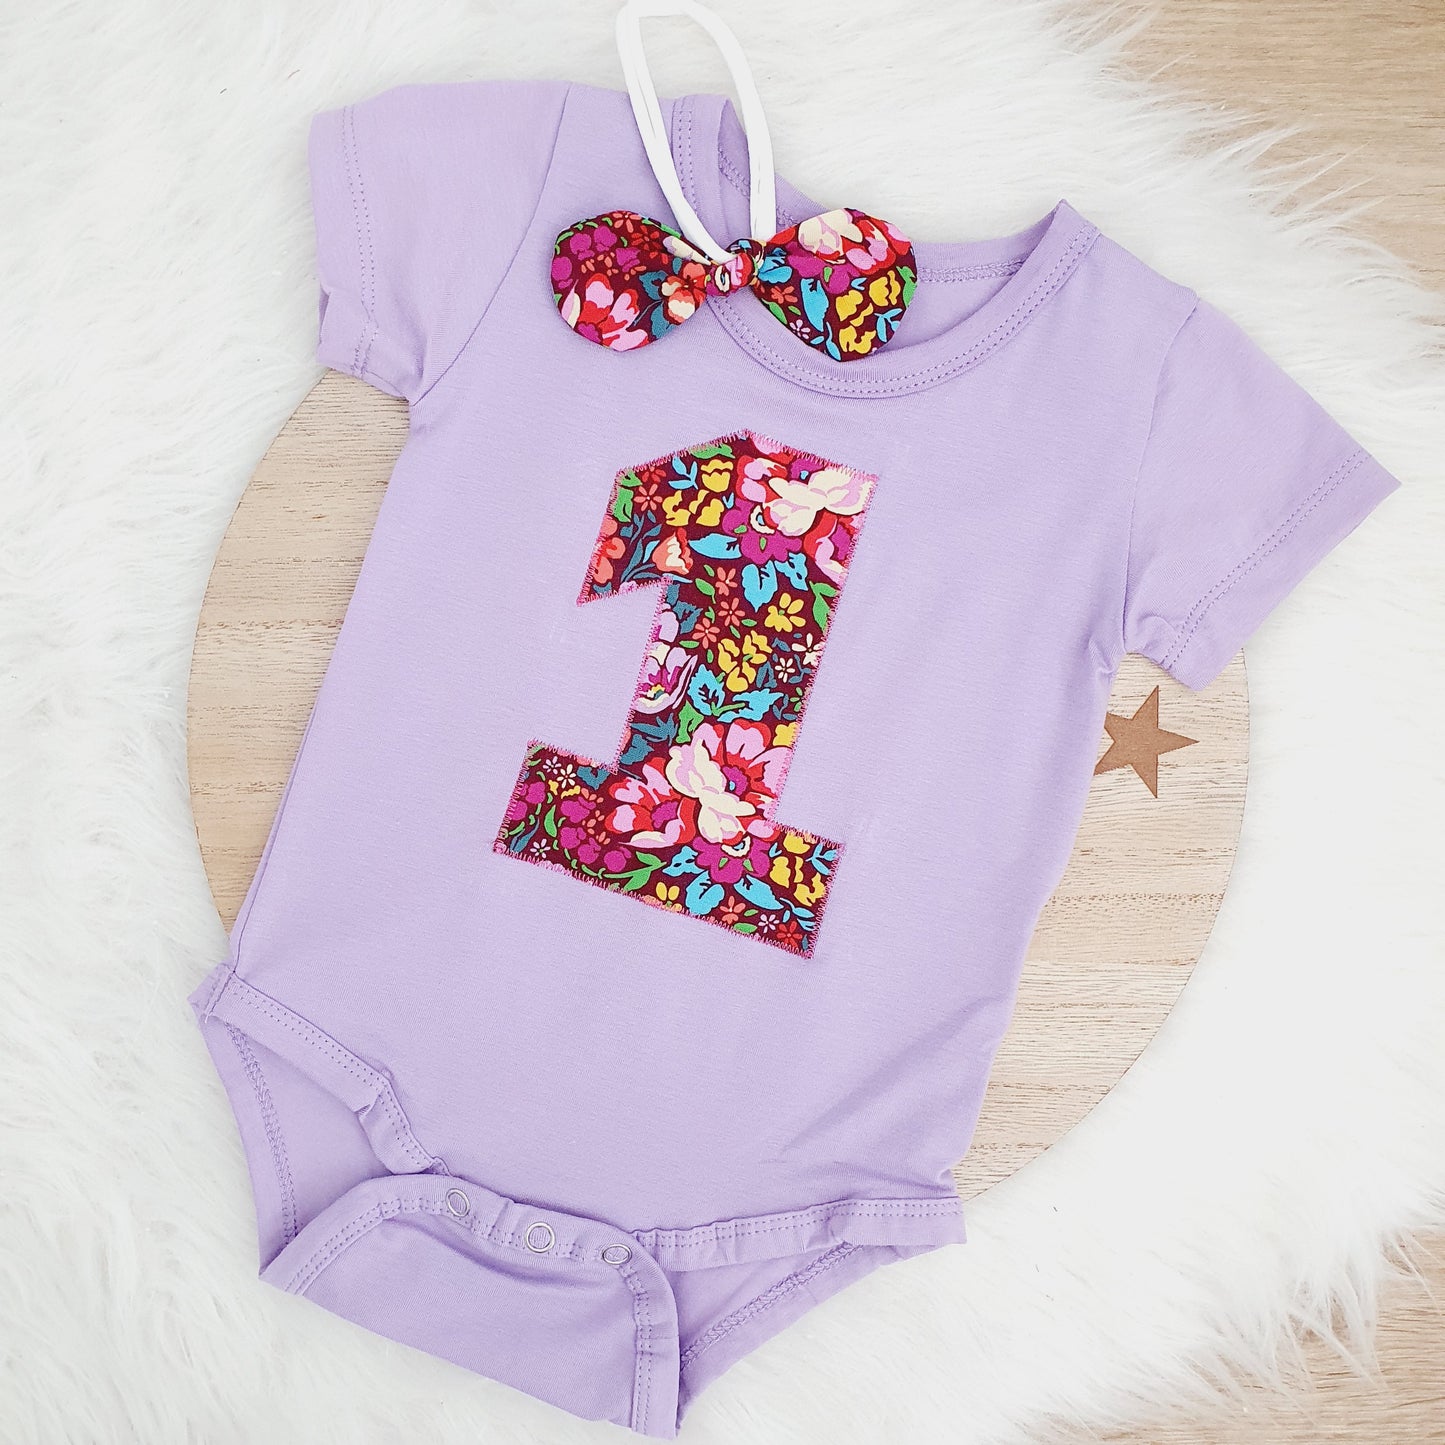 Floral Girls 1st Birthday Short Sleeve Bodysuit with Headband, Size 1, First Birthday Outfit, Cake Smash Outfit, FLOWER GARDEN